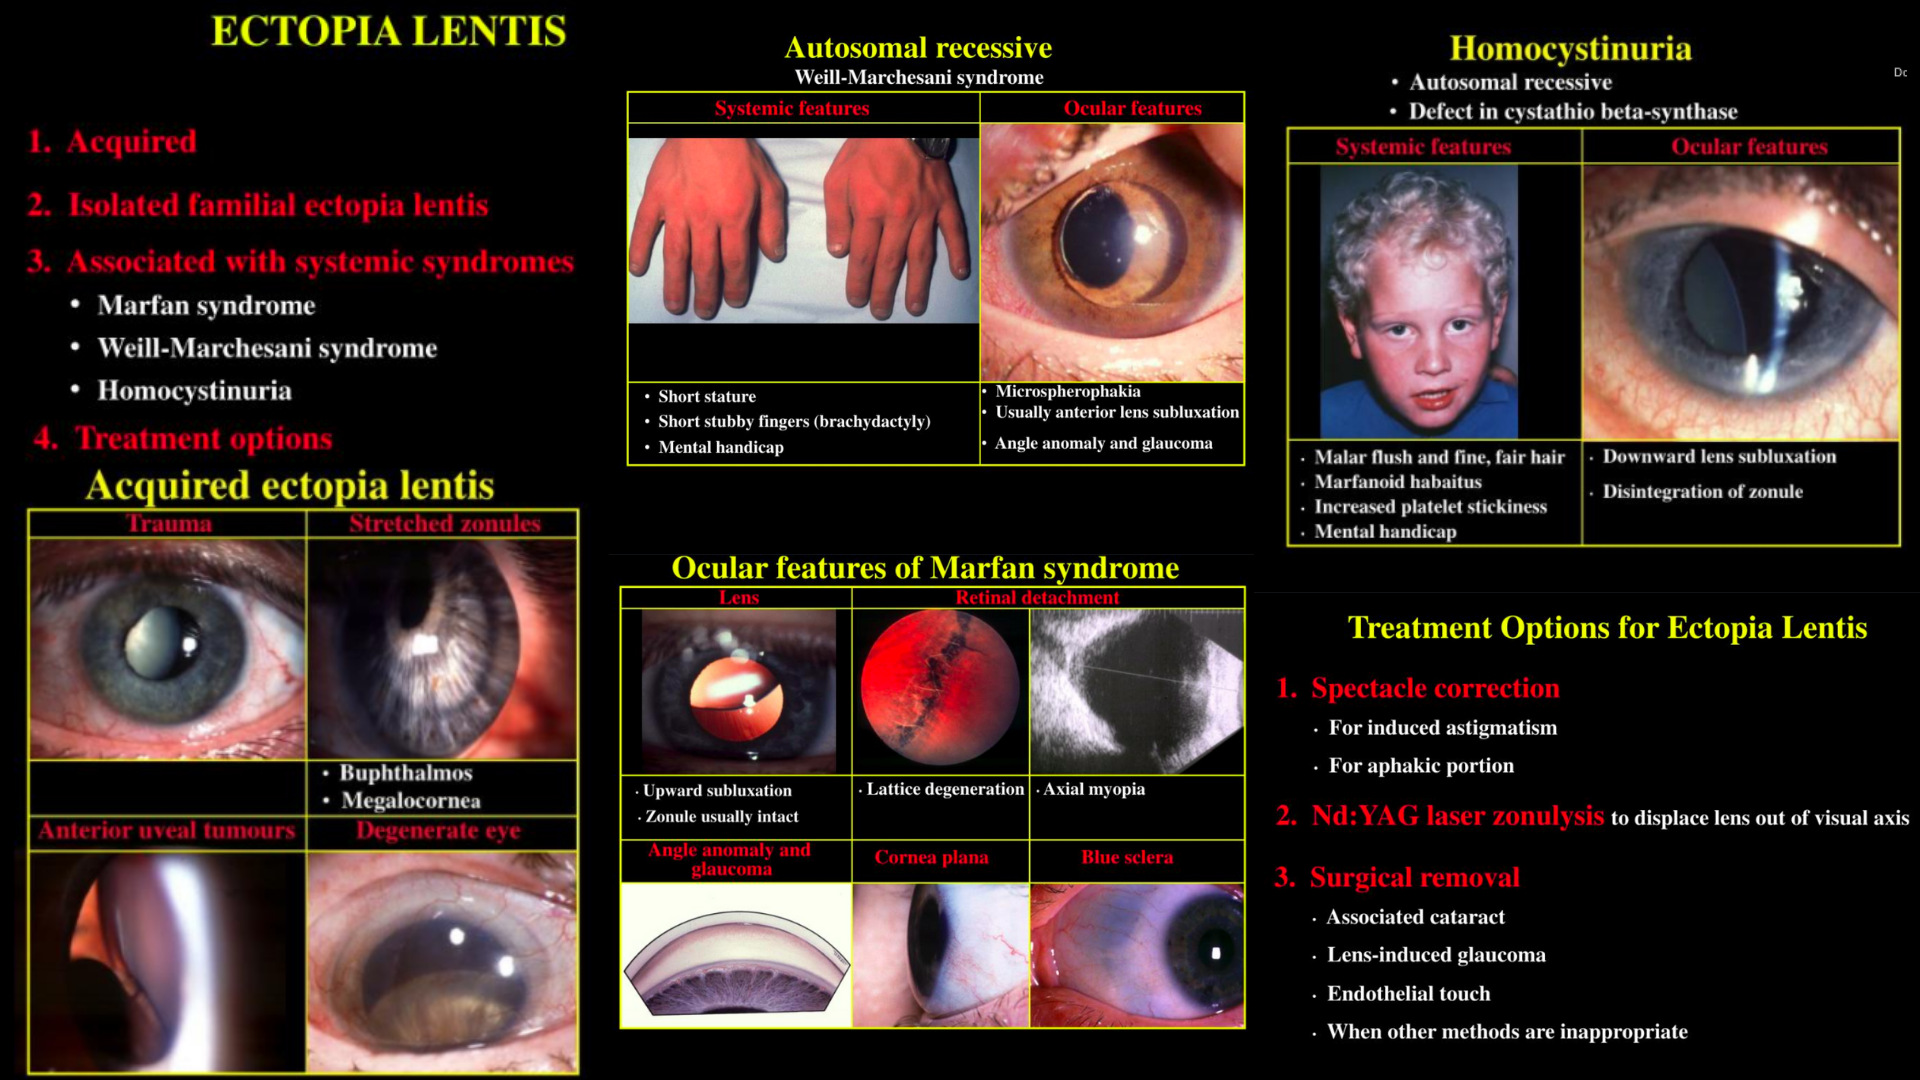 Verschillende goederen Dinkarville Afleiding Ectopia Lentis - Acquired and Systemic Associations - Marfan syndrome,  Weill-Marchesani syndrome, Homocystinuria .